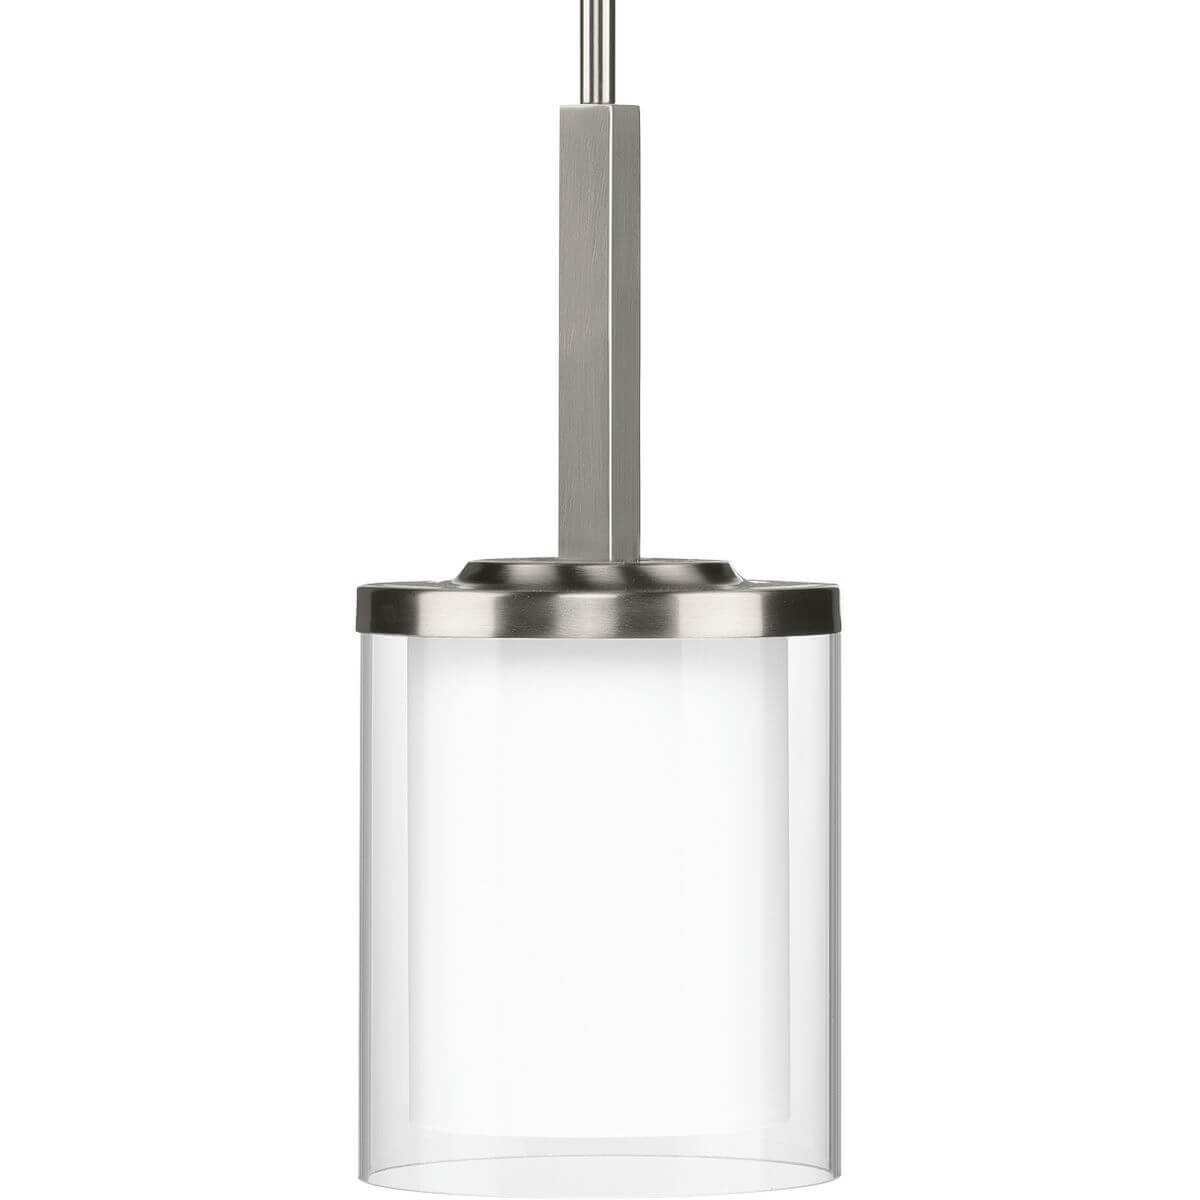 Progress Lighting Mast 1 Light 6 inch Mini Pendant in Brushed Nickel with Clear Glass P500192-009